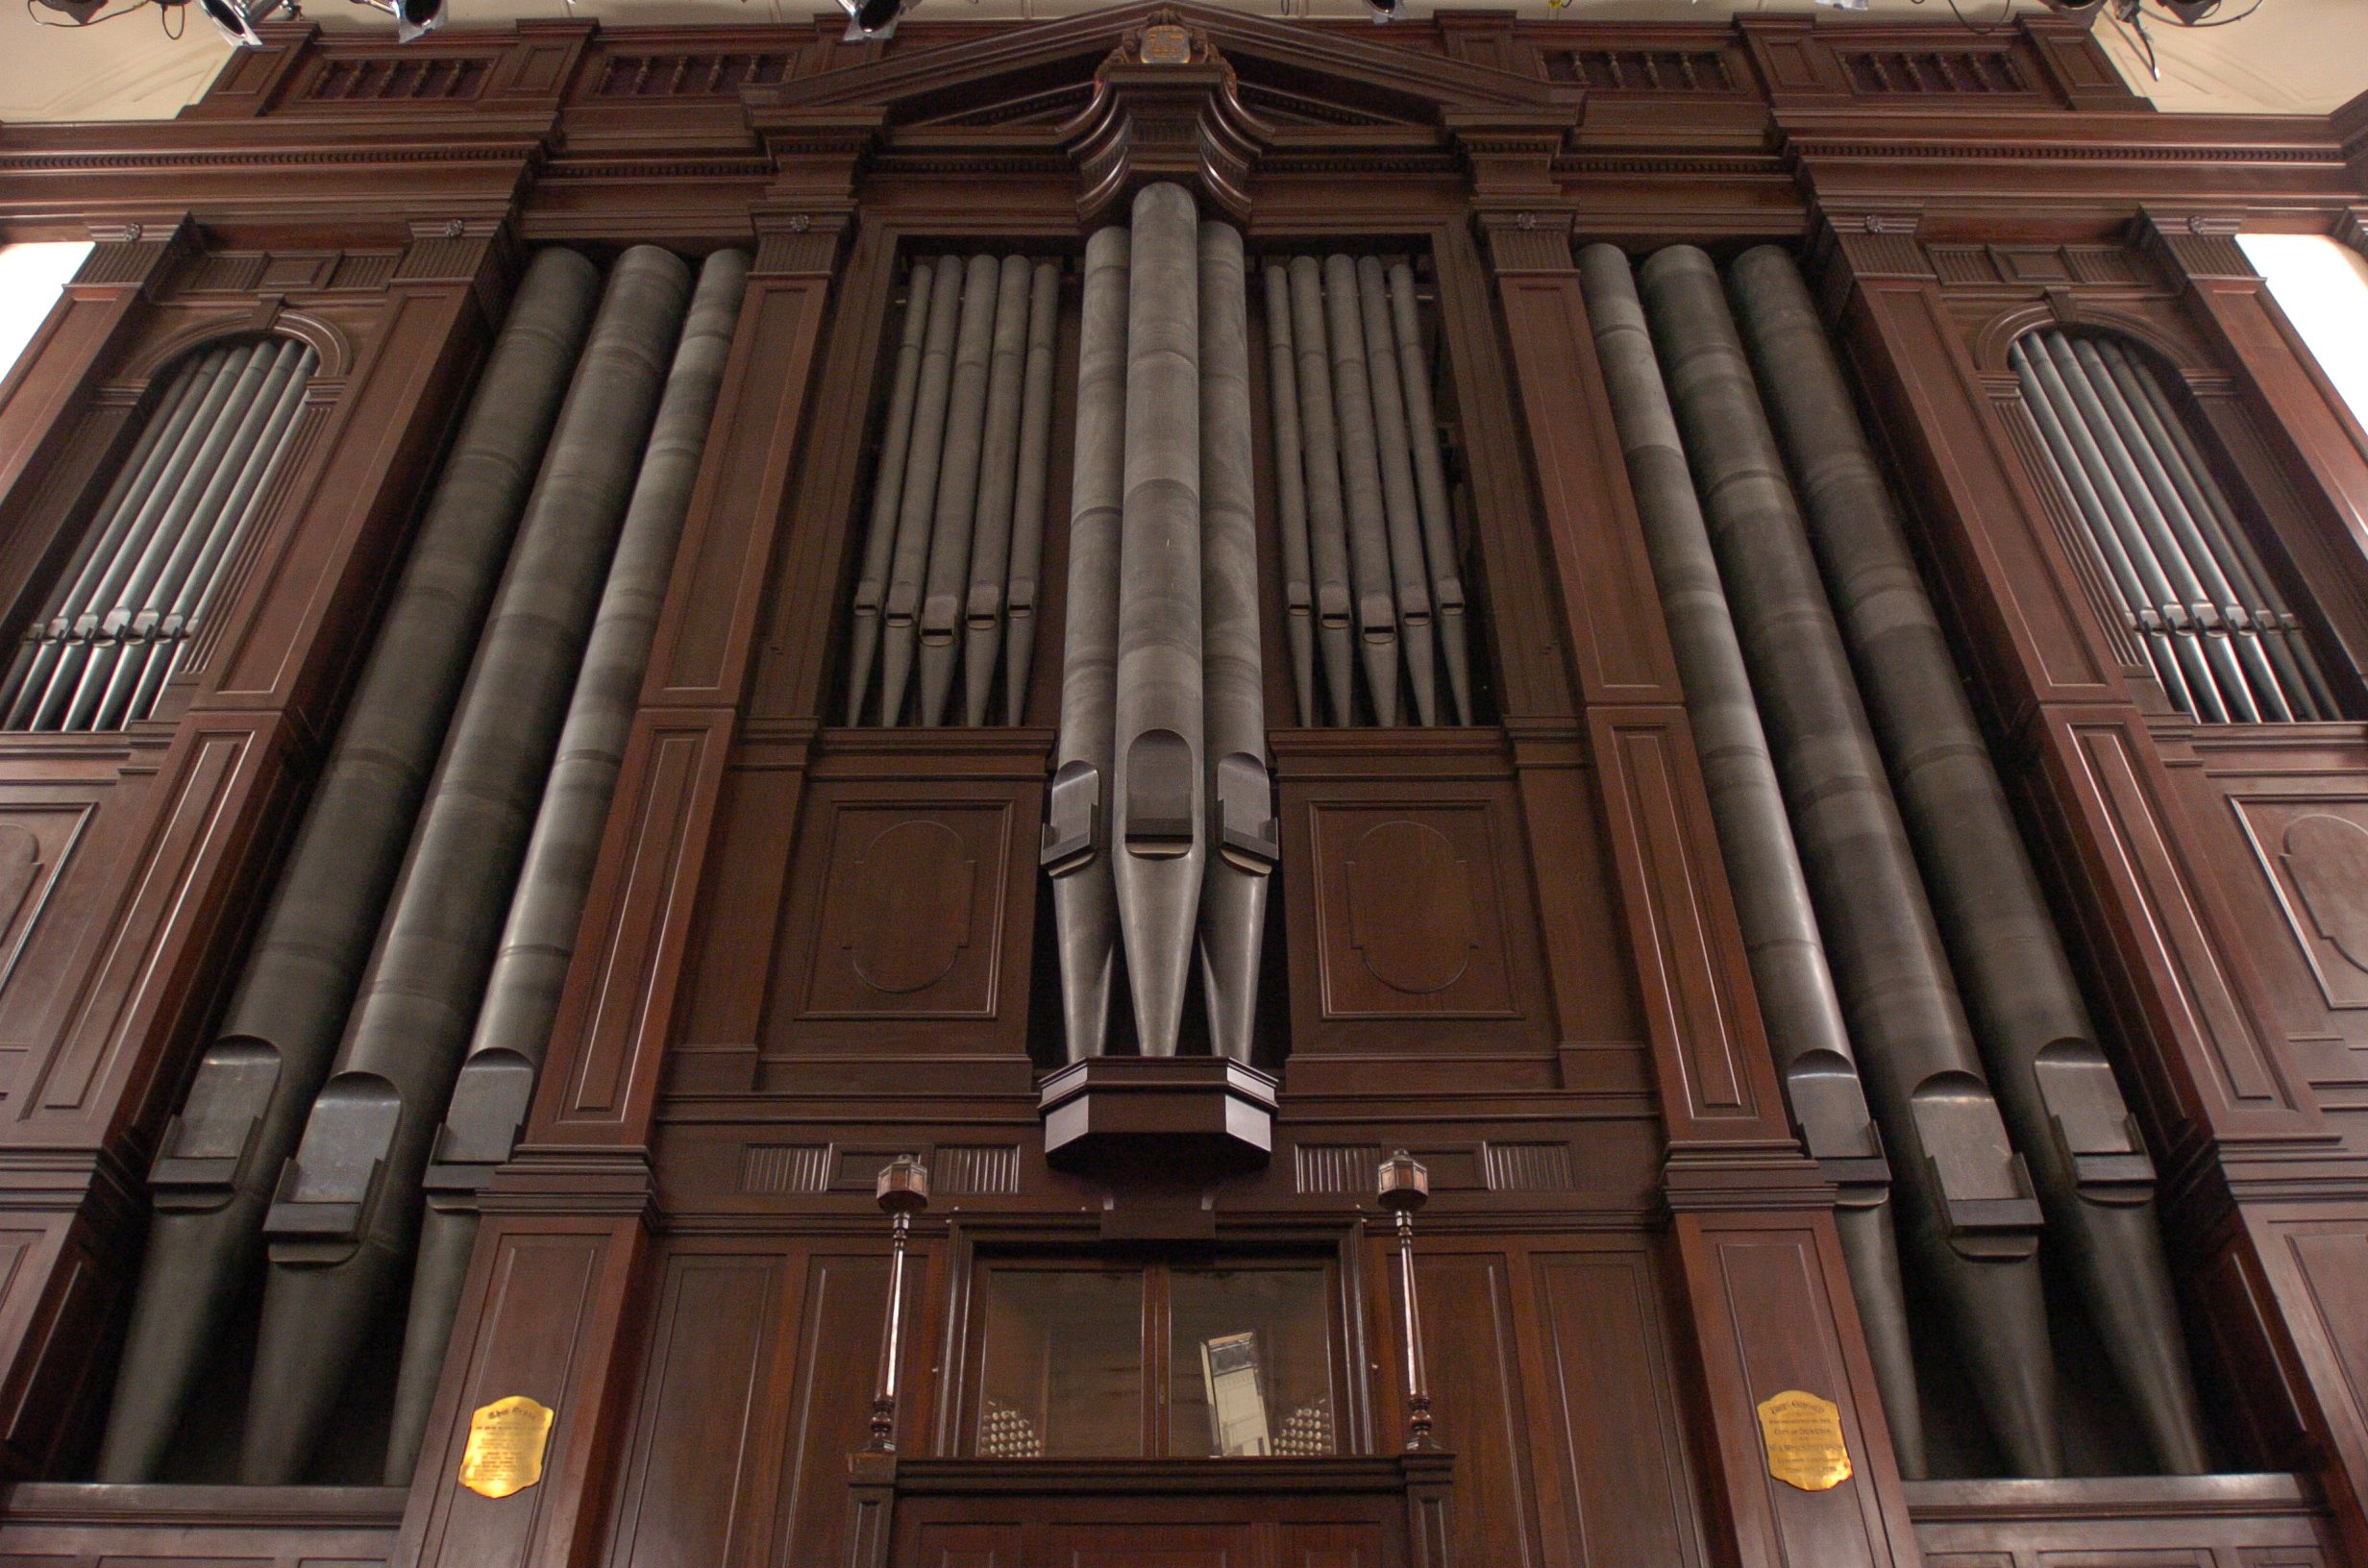 The Town Hall organ - "Norma". PHOTO: ODT FILES